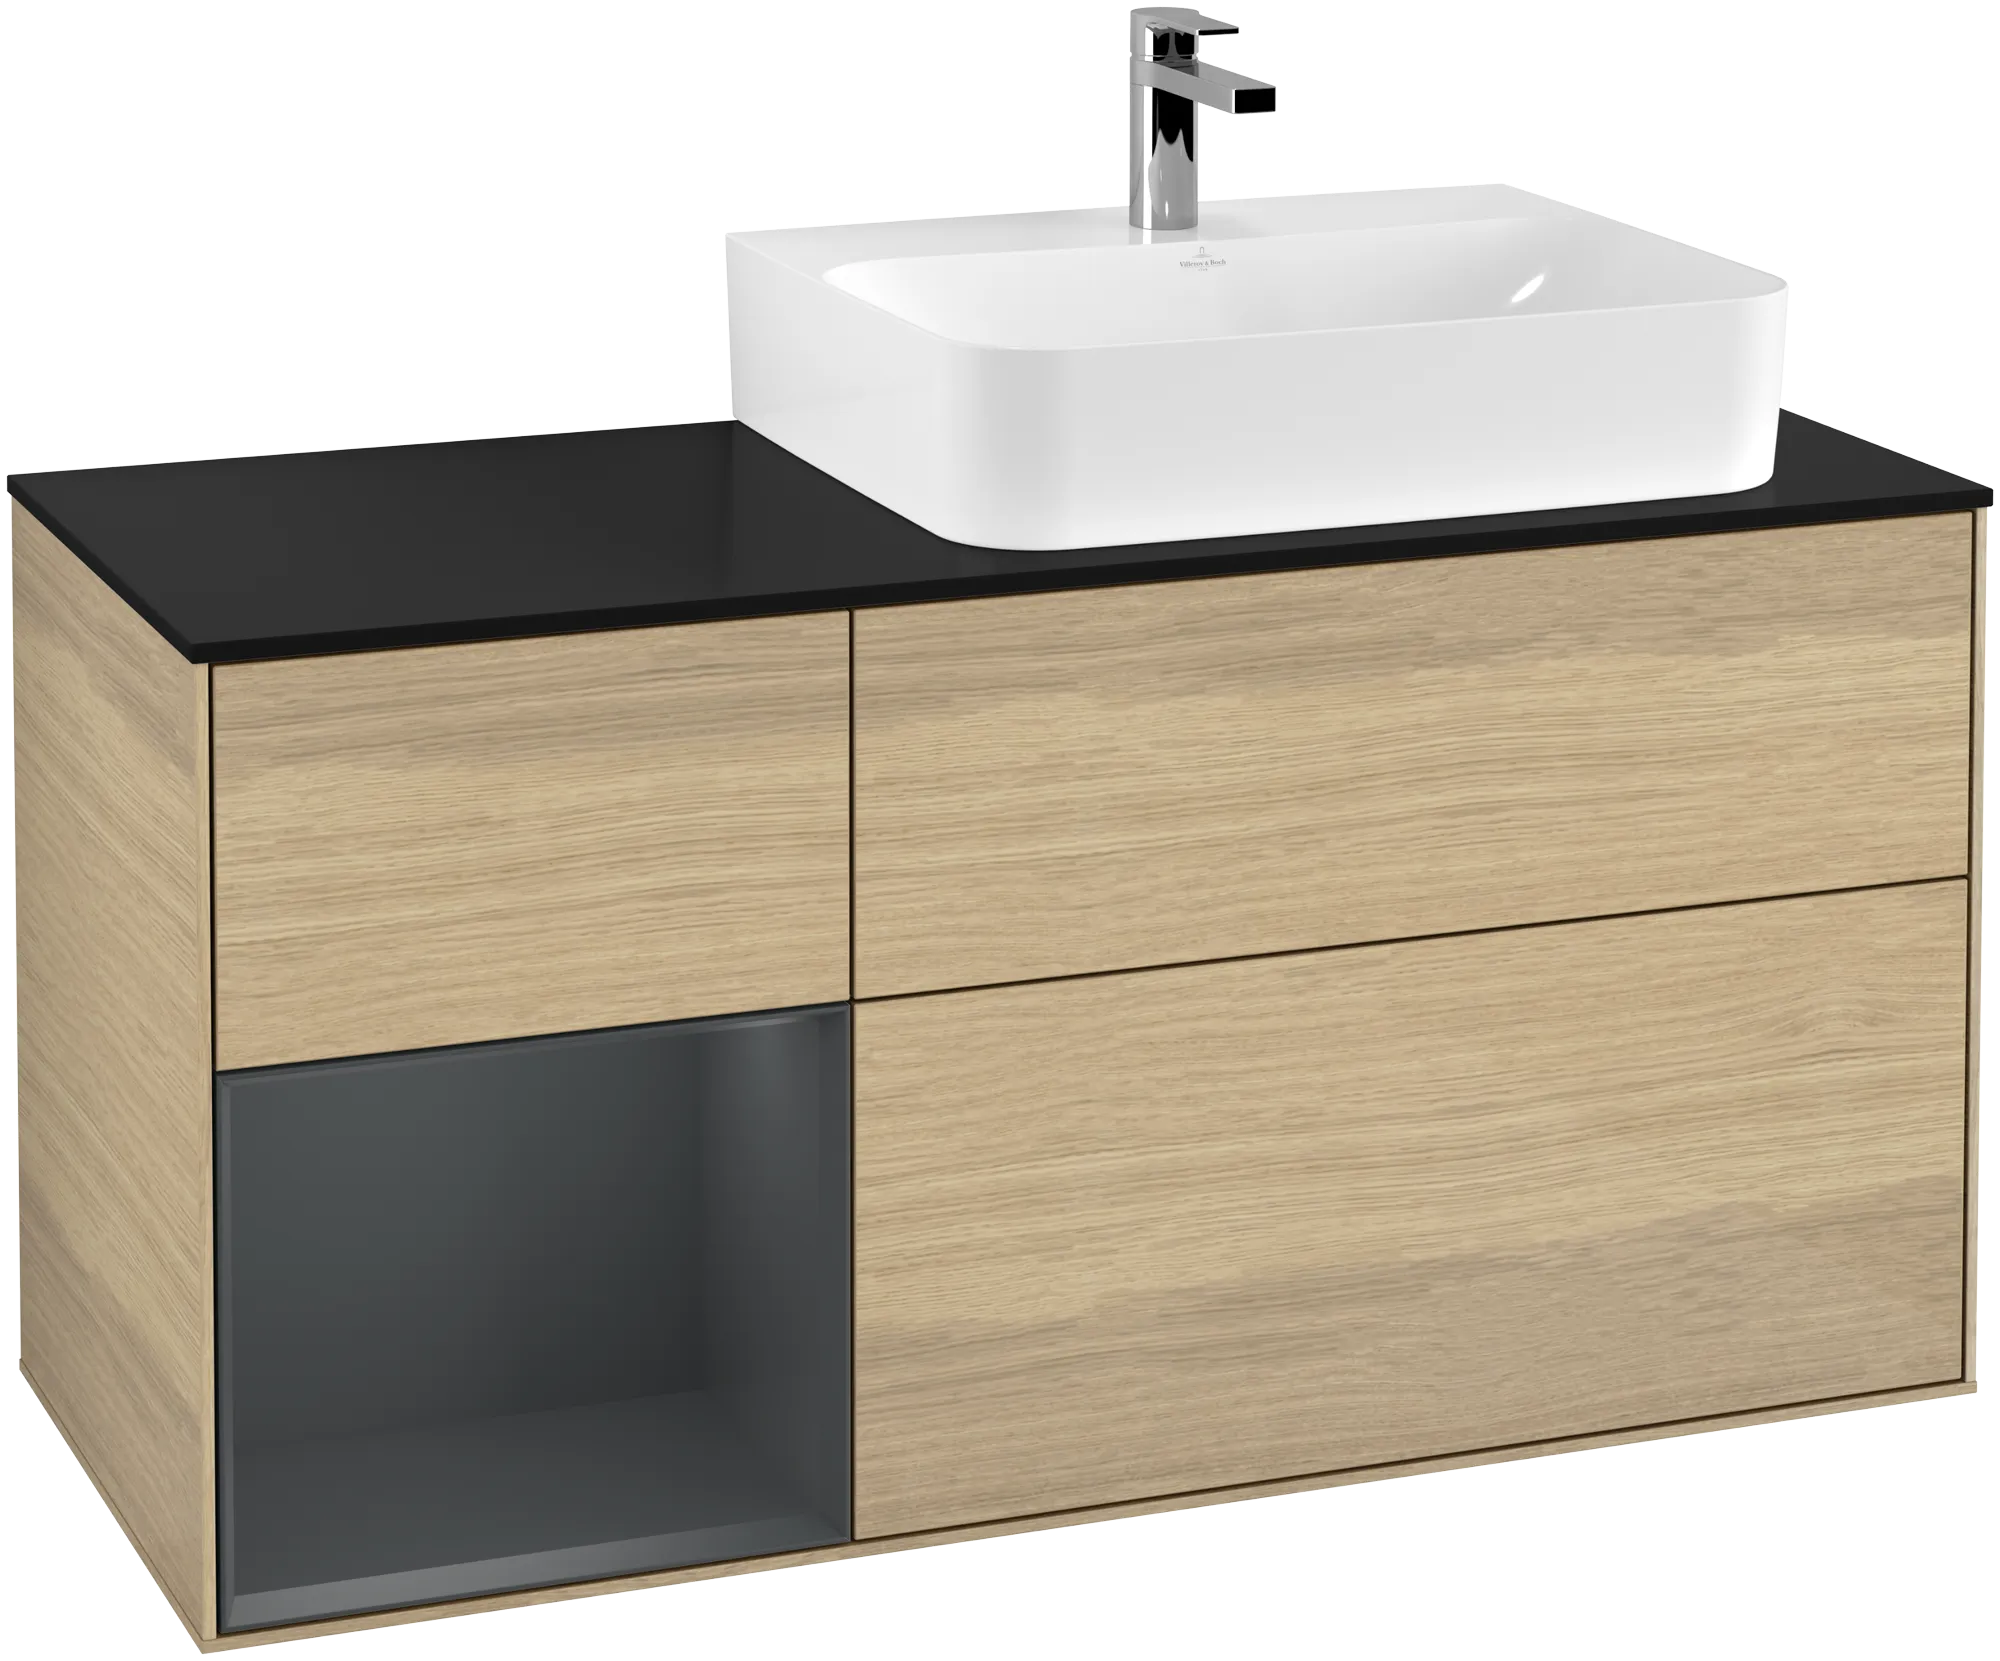 Picture of VILLEROY BOCH Finion Vanity unit, with lighting, 3 pull-out compartments, 1200 x 603 x 501 mm, Oak Veneer / Midnight Blue Matt Lacquer / Glass Black Matt #G142HGPC